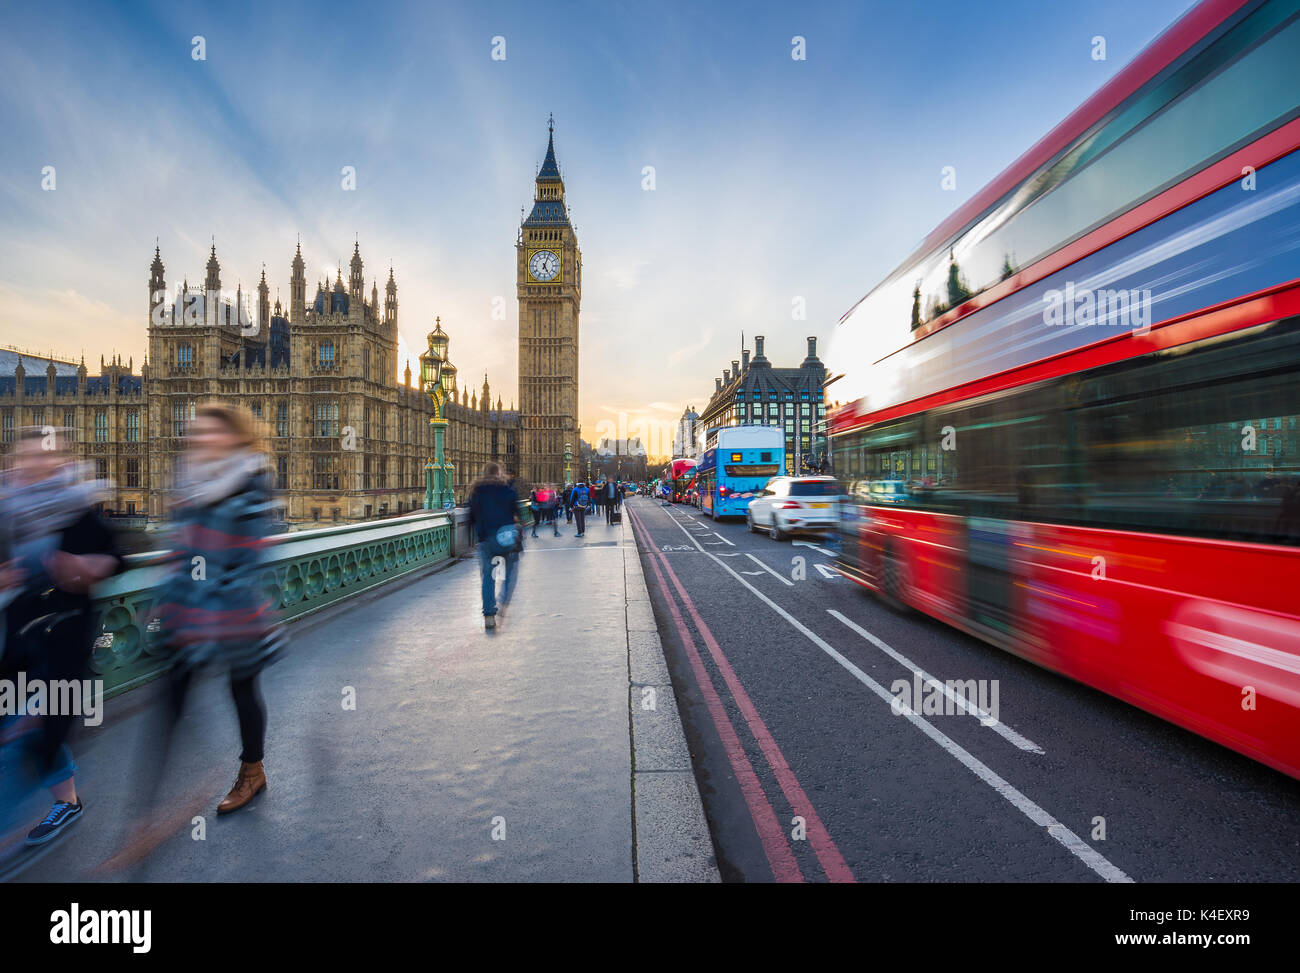 London, England - The iconic Big Ben and the Houses of Parliament with famous red double-decker bus and tourists on the move on Westminster bridge at  Stock Photo